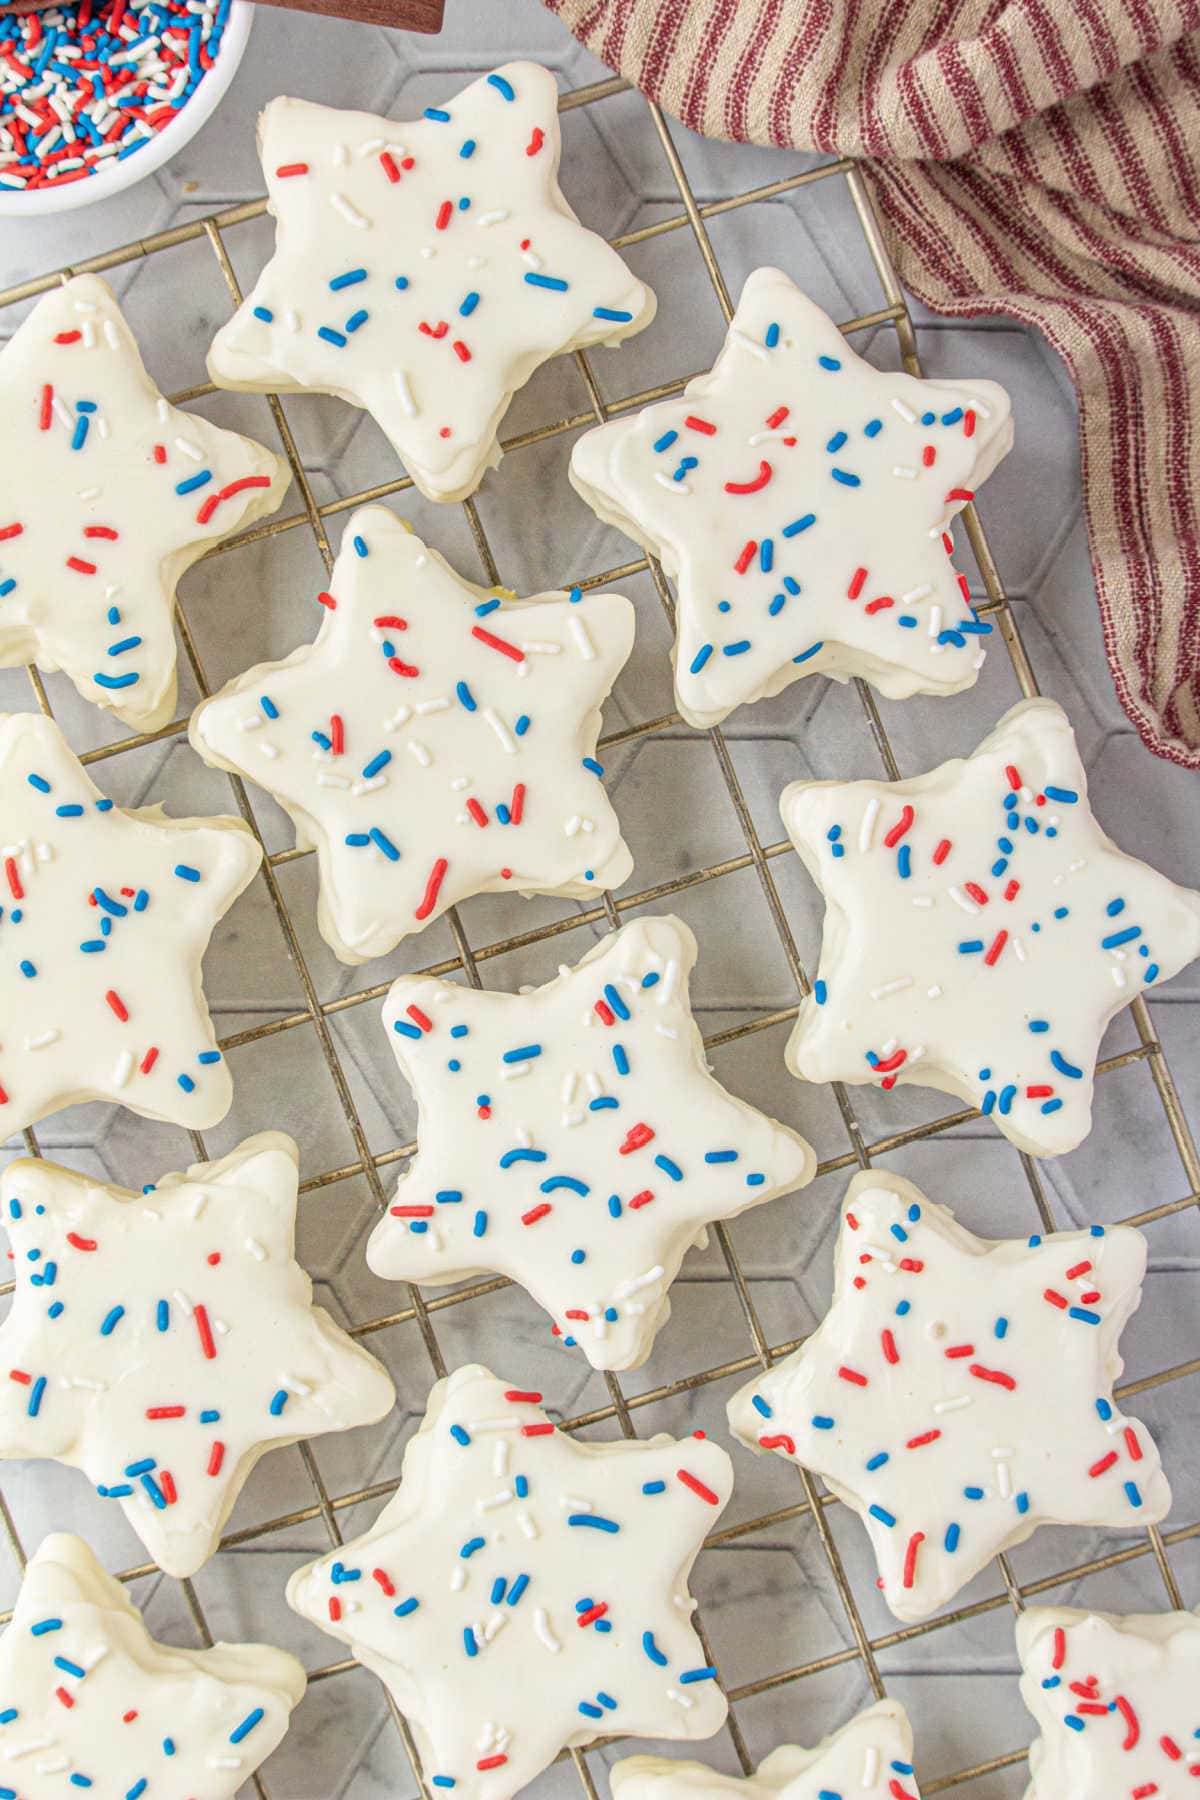 Overhead view of finished cakes decorated with red white and blue sprinkles.